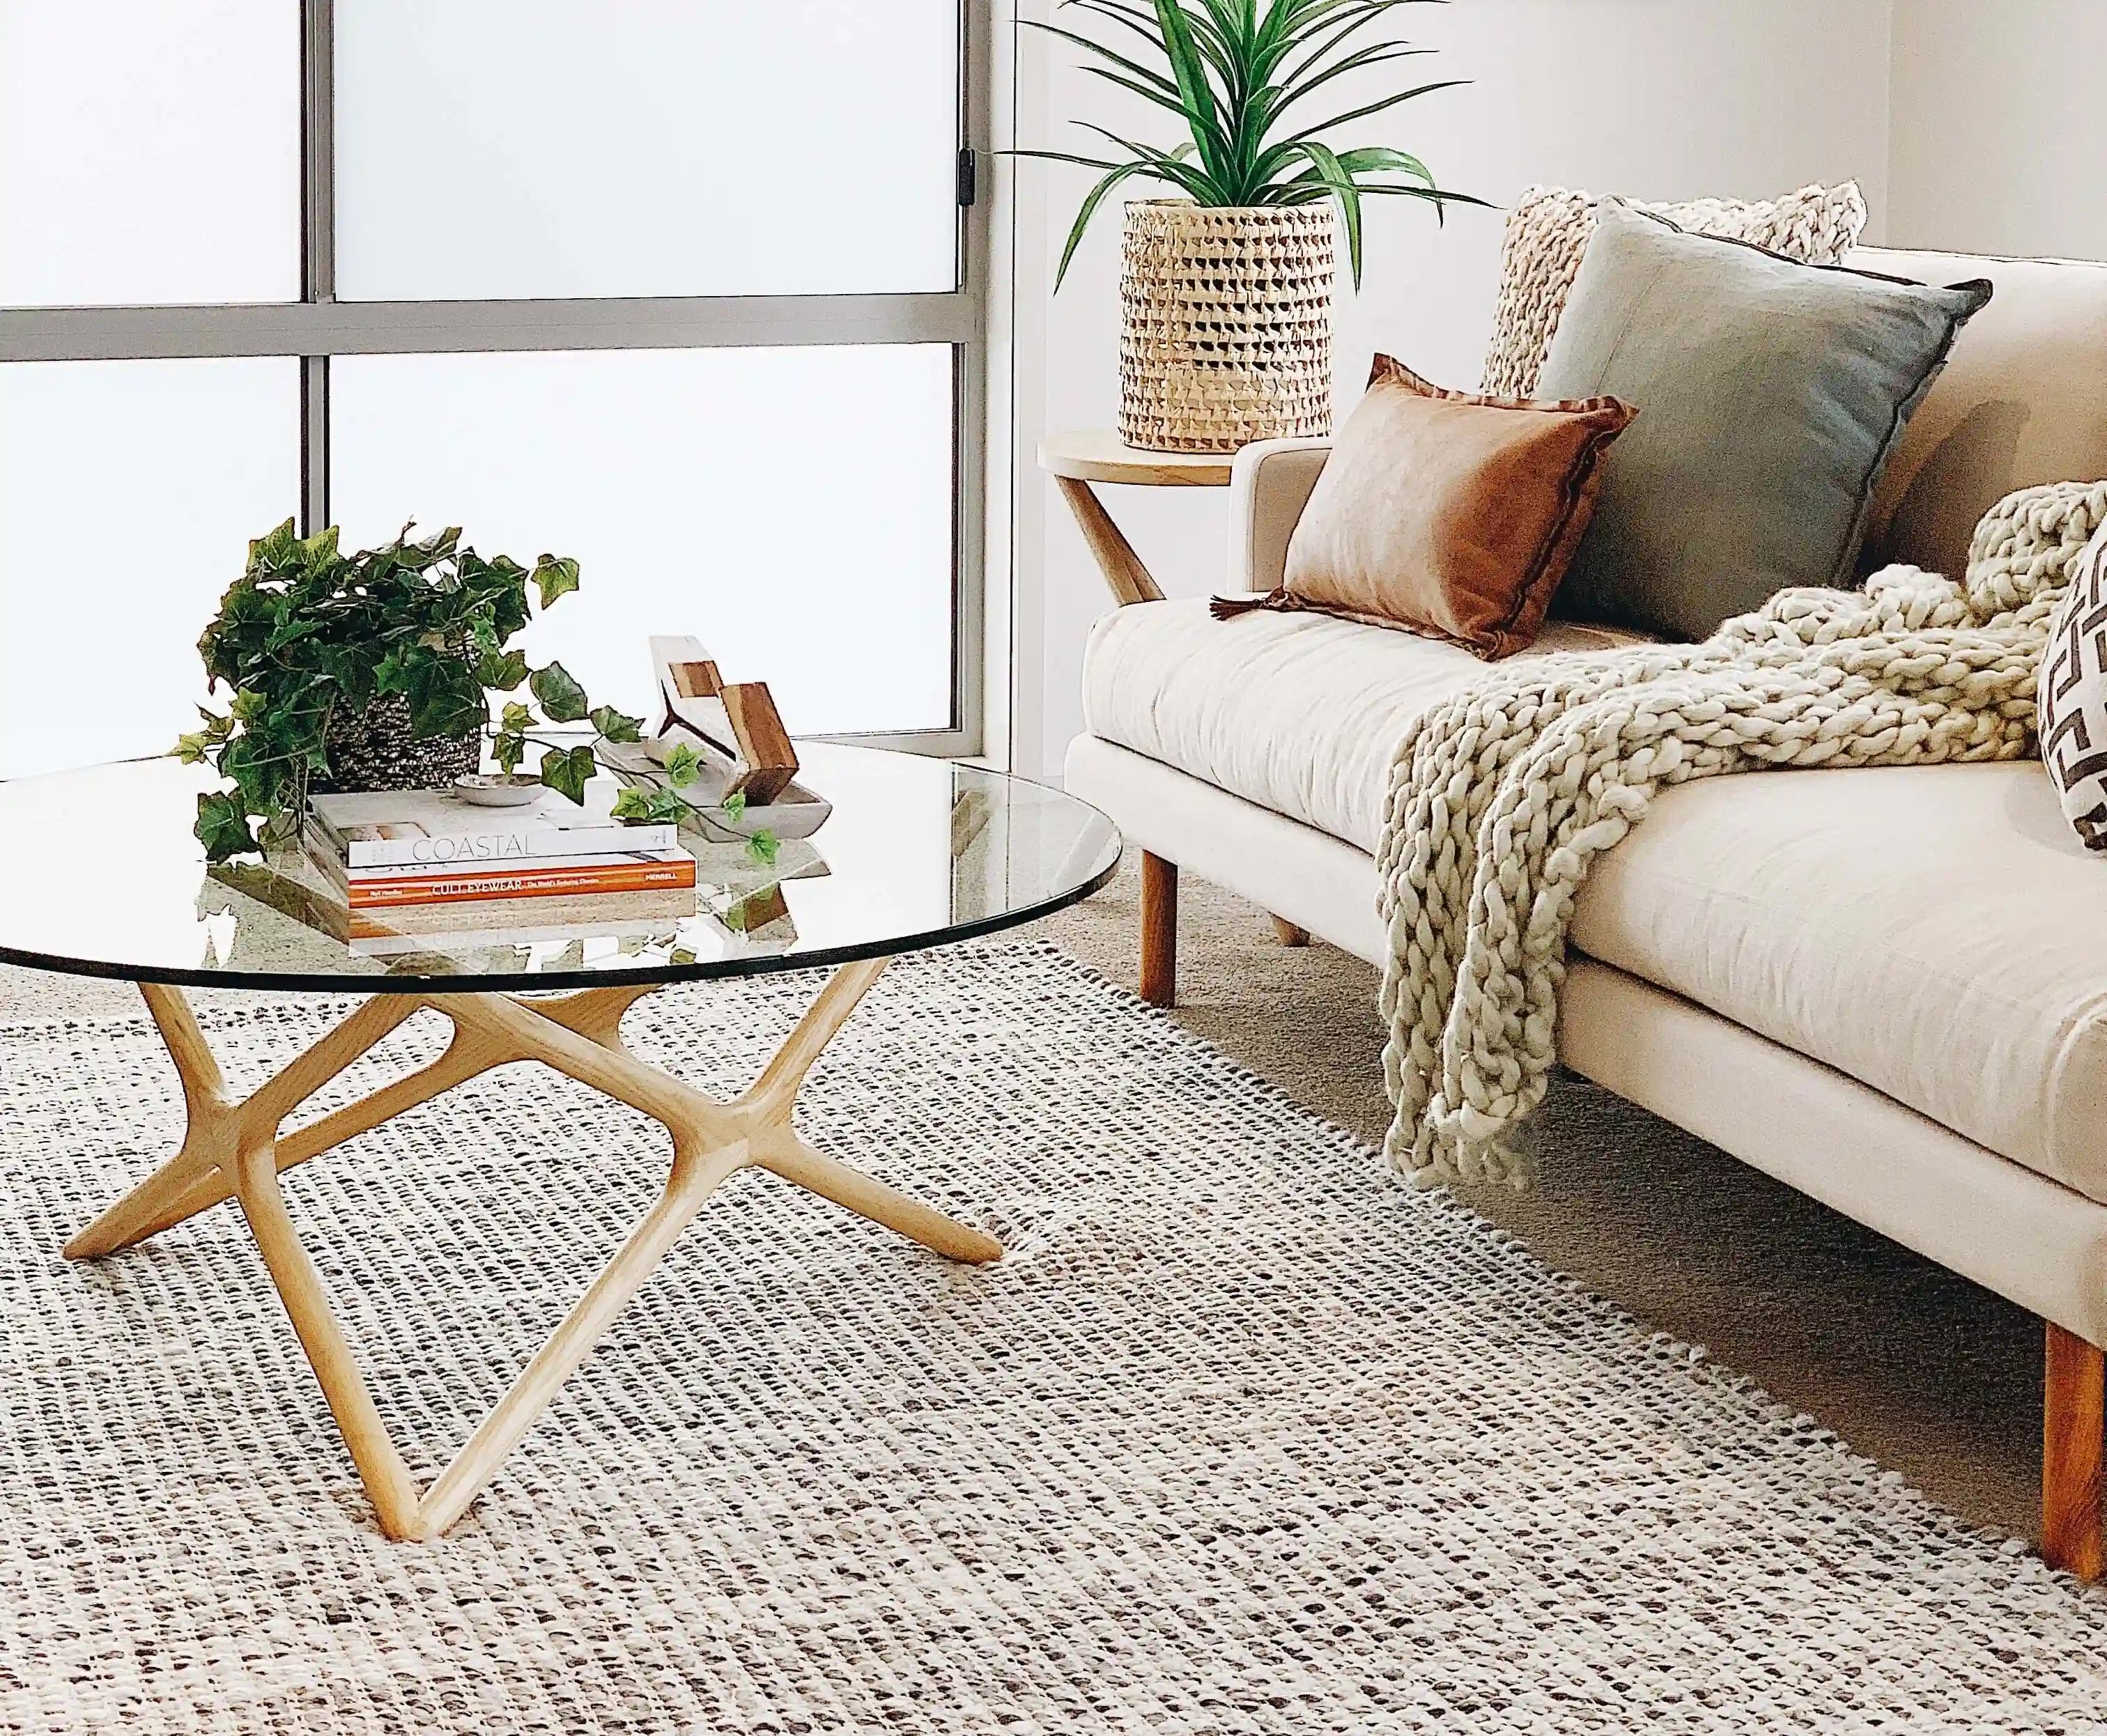 The Benefits of Using a Grey Rug in High-Traffic Areas